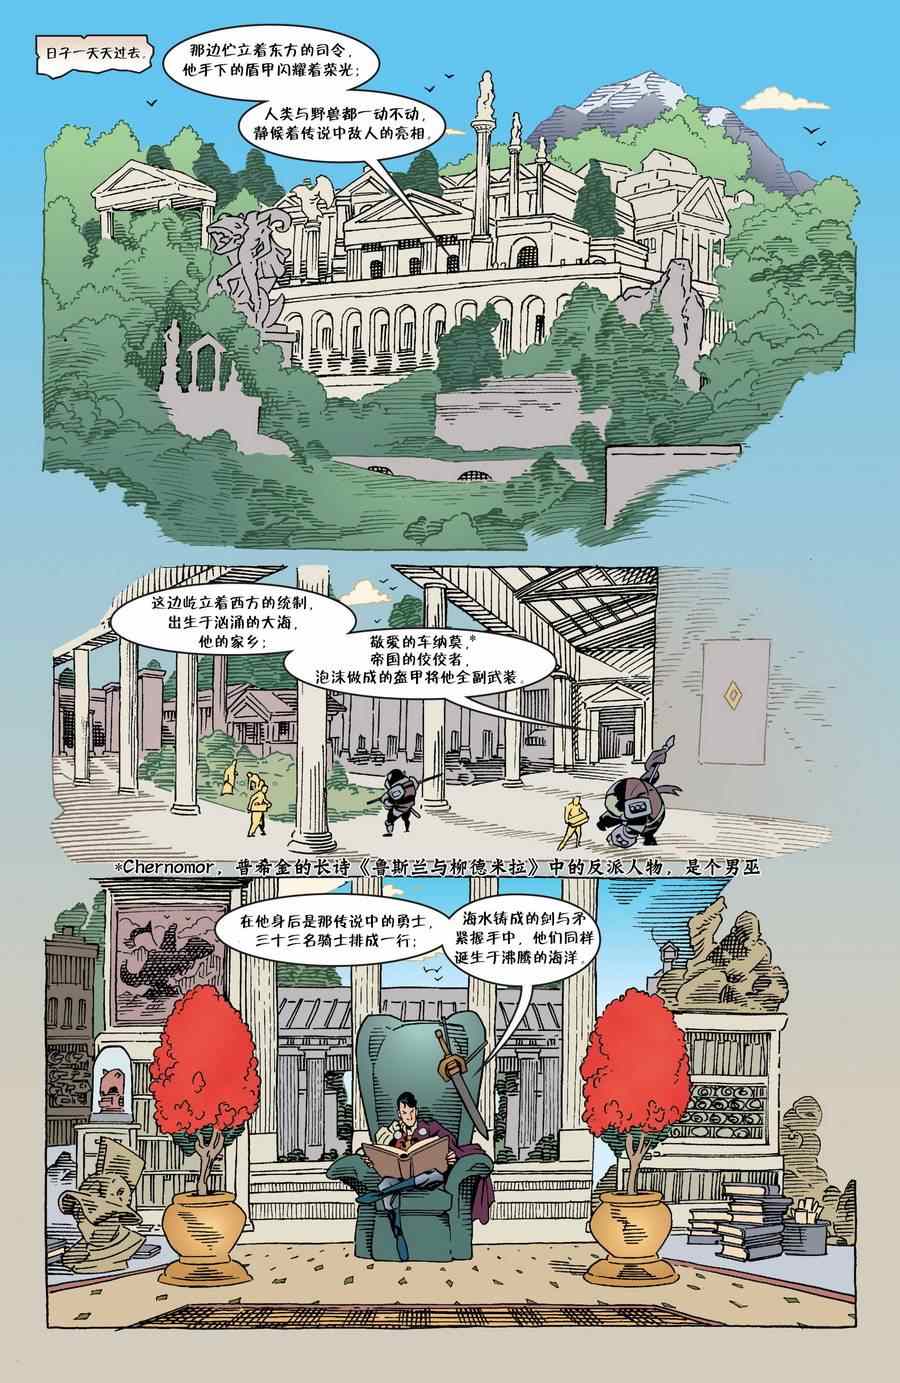 《Fables》漫画 036卷